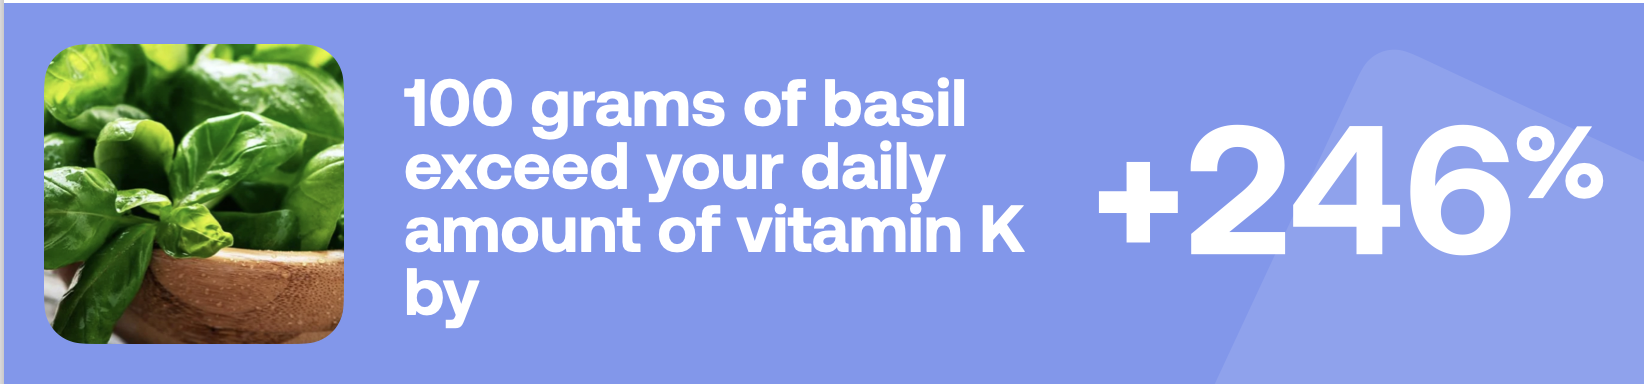 100 grams of basil exceed your daily amount of vitamin K by + 346%